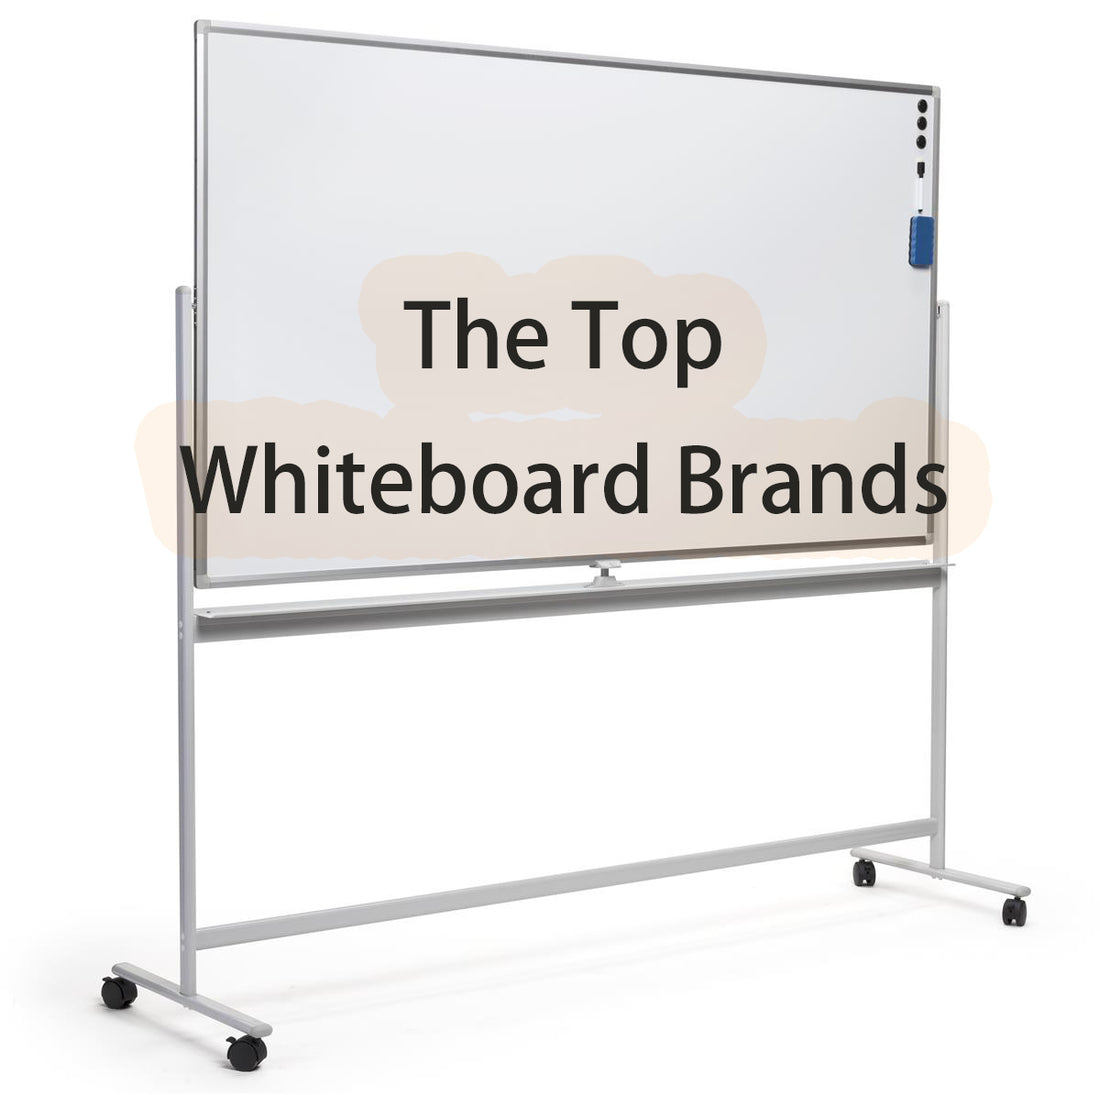 What are the top 10 dry erase whiteboard brands? Where are their products produced?